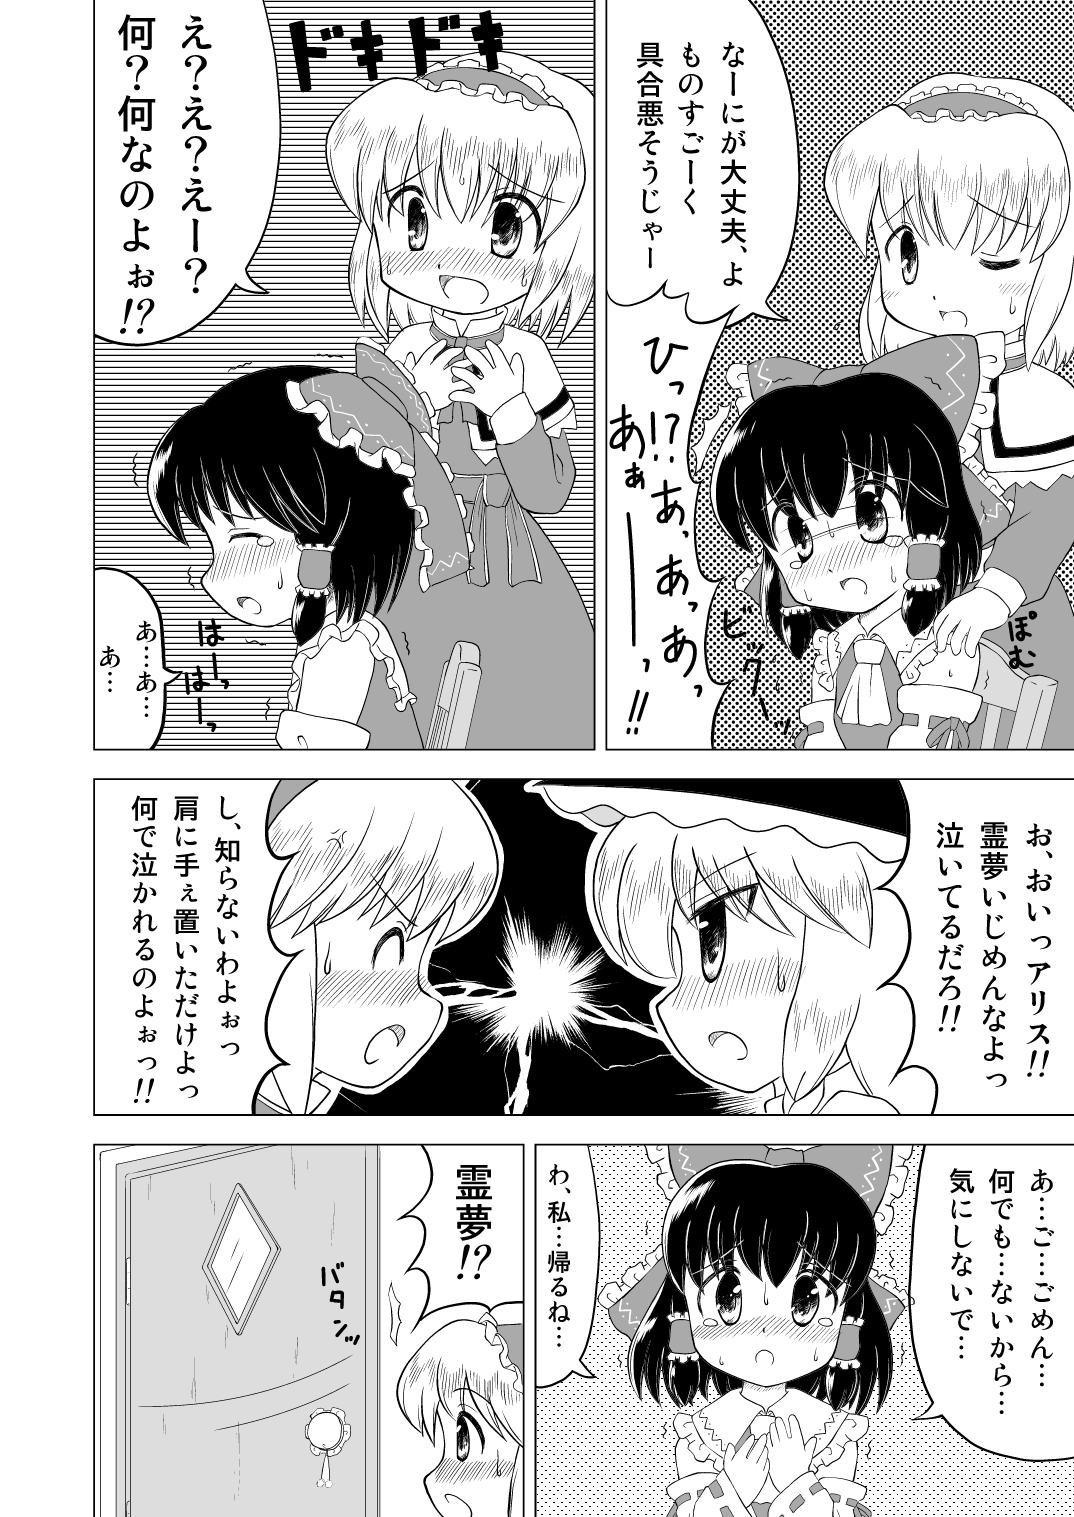 Titten 博麗霊夢お漏らし調教！ - Touhou project Gay Boy Porn - Page 2